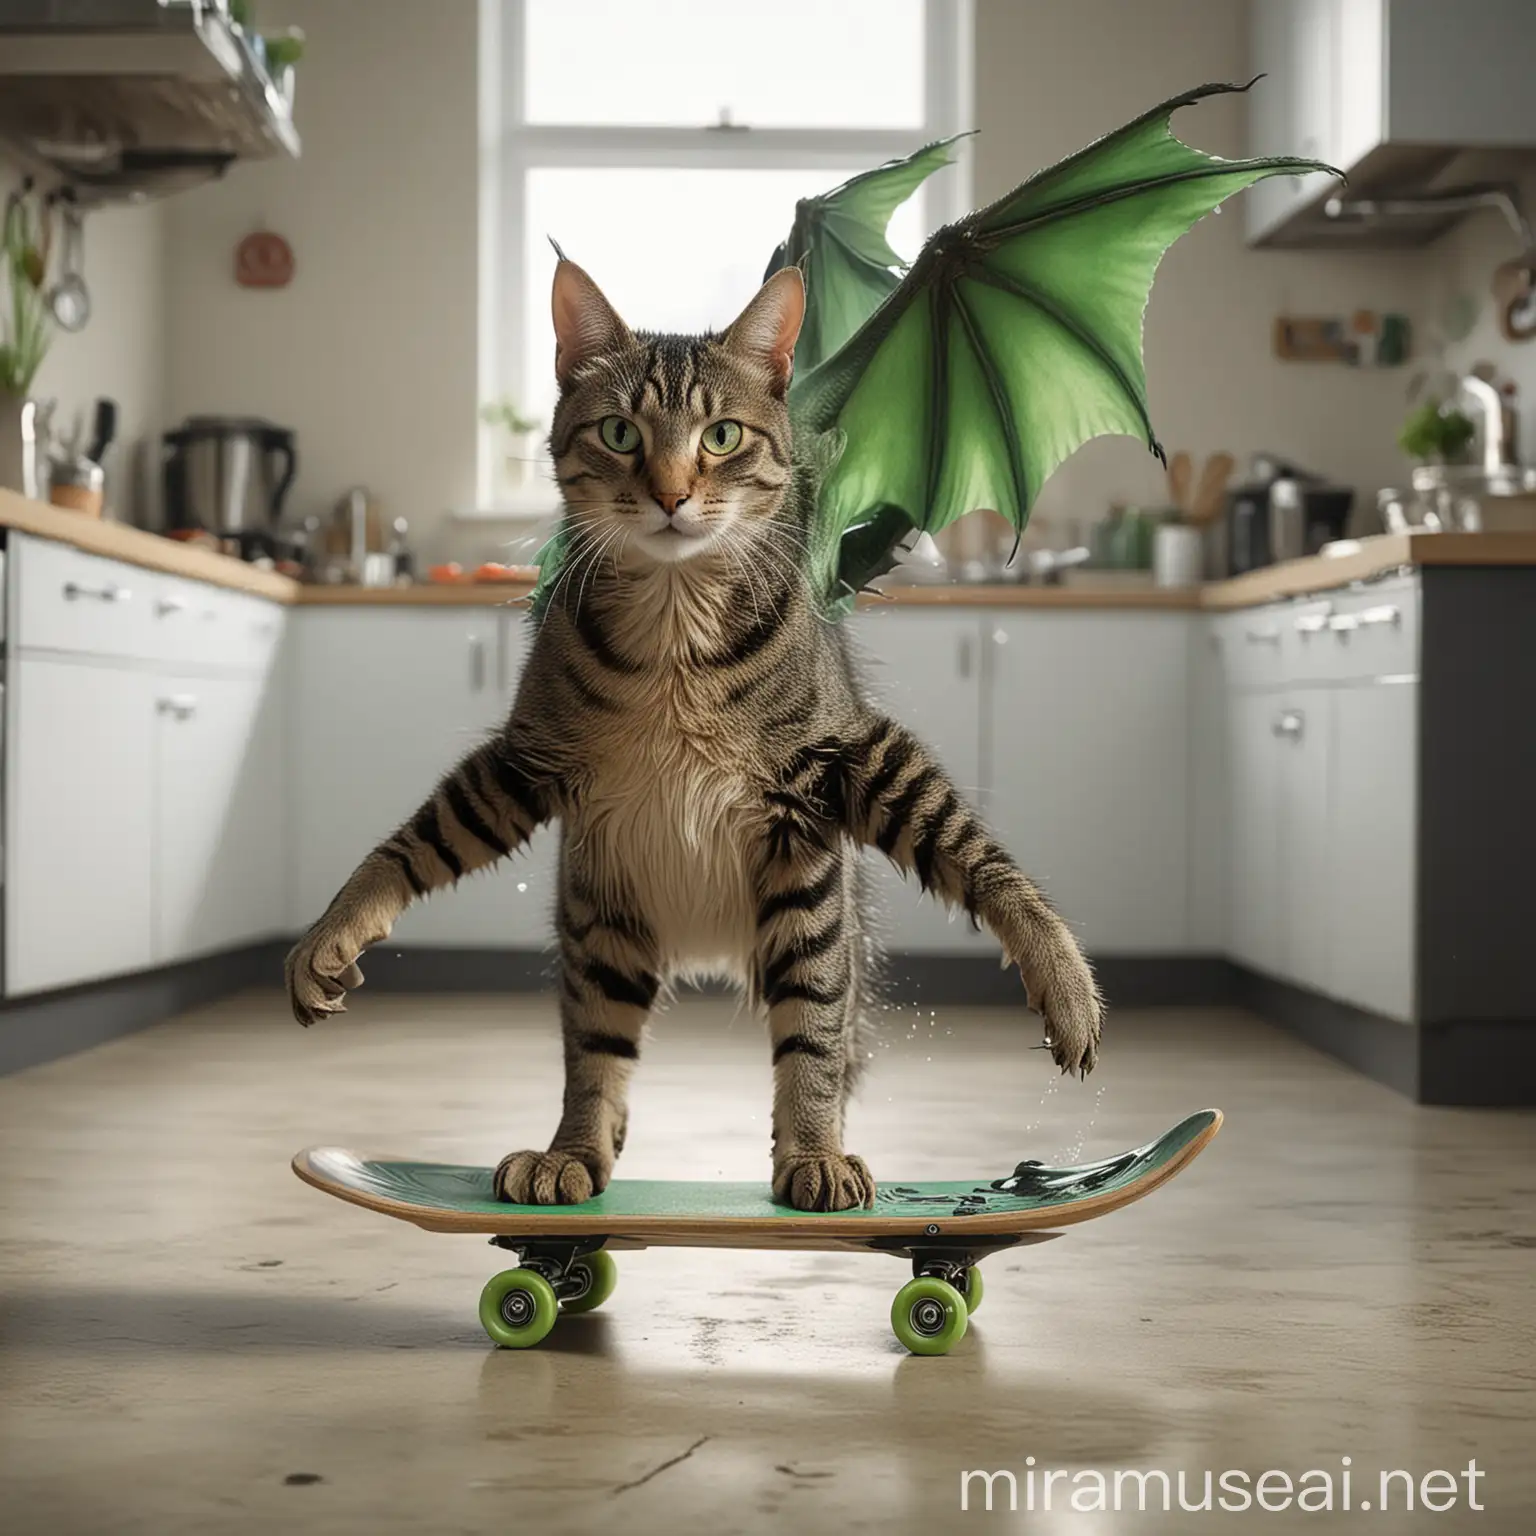 Futuristic Kitchen Cat with Green Dragon Tail Skateboards in Fishbowl Flight